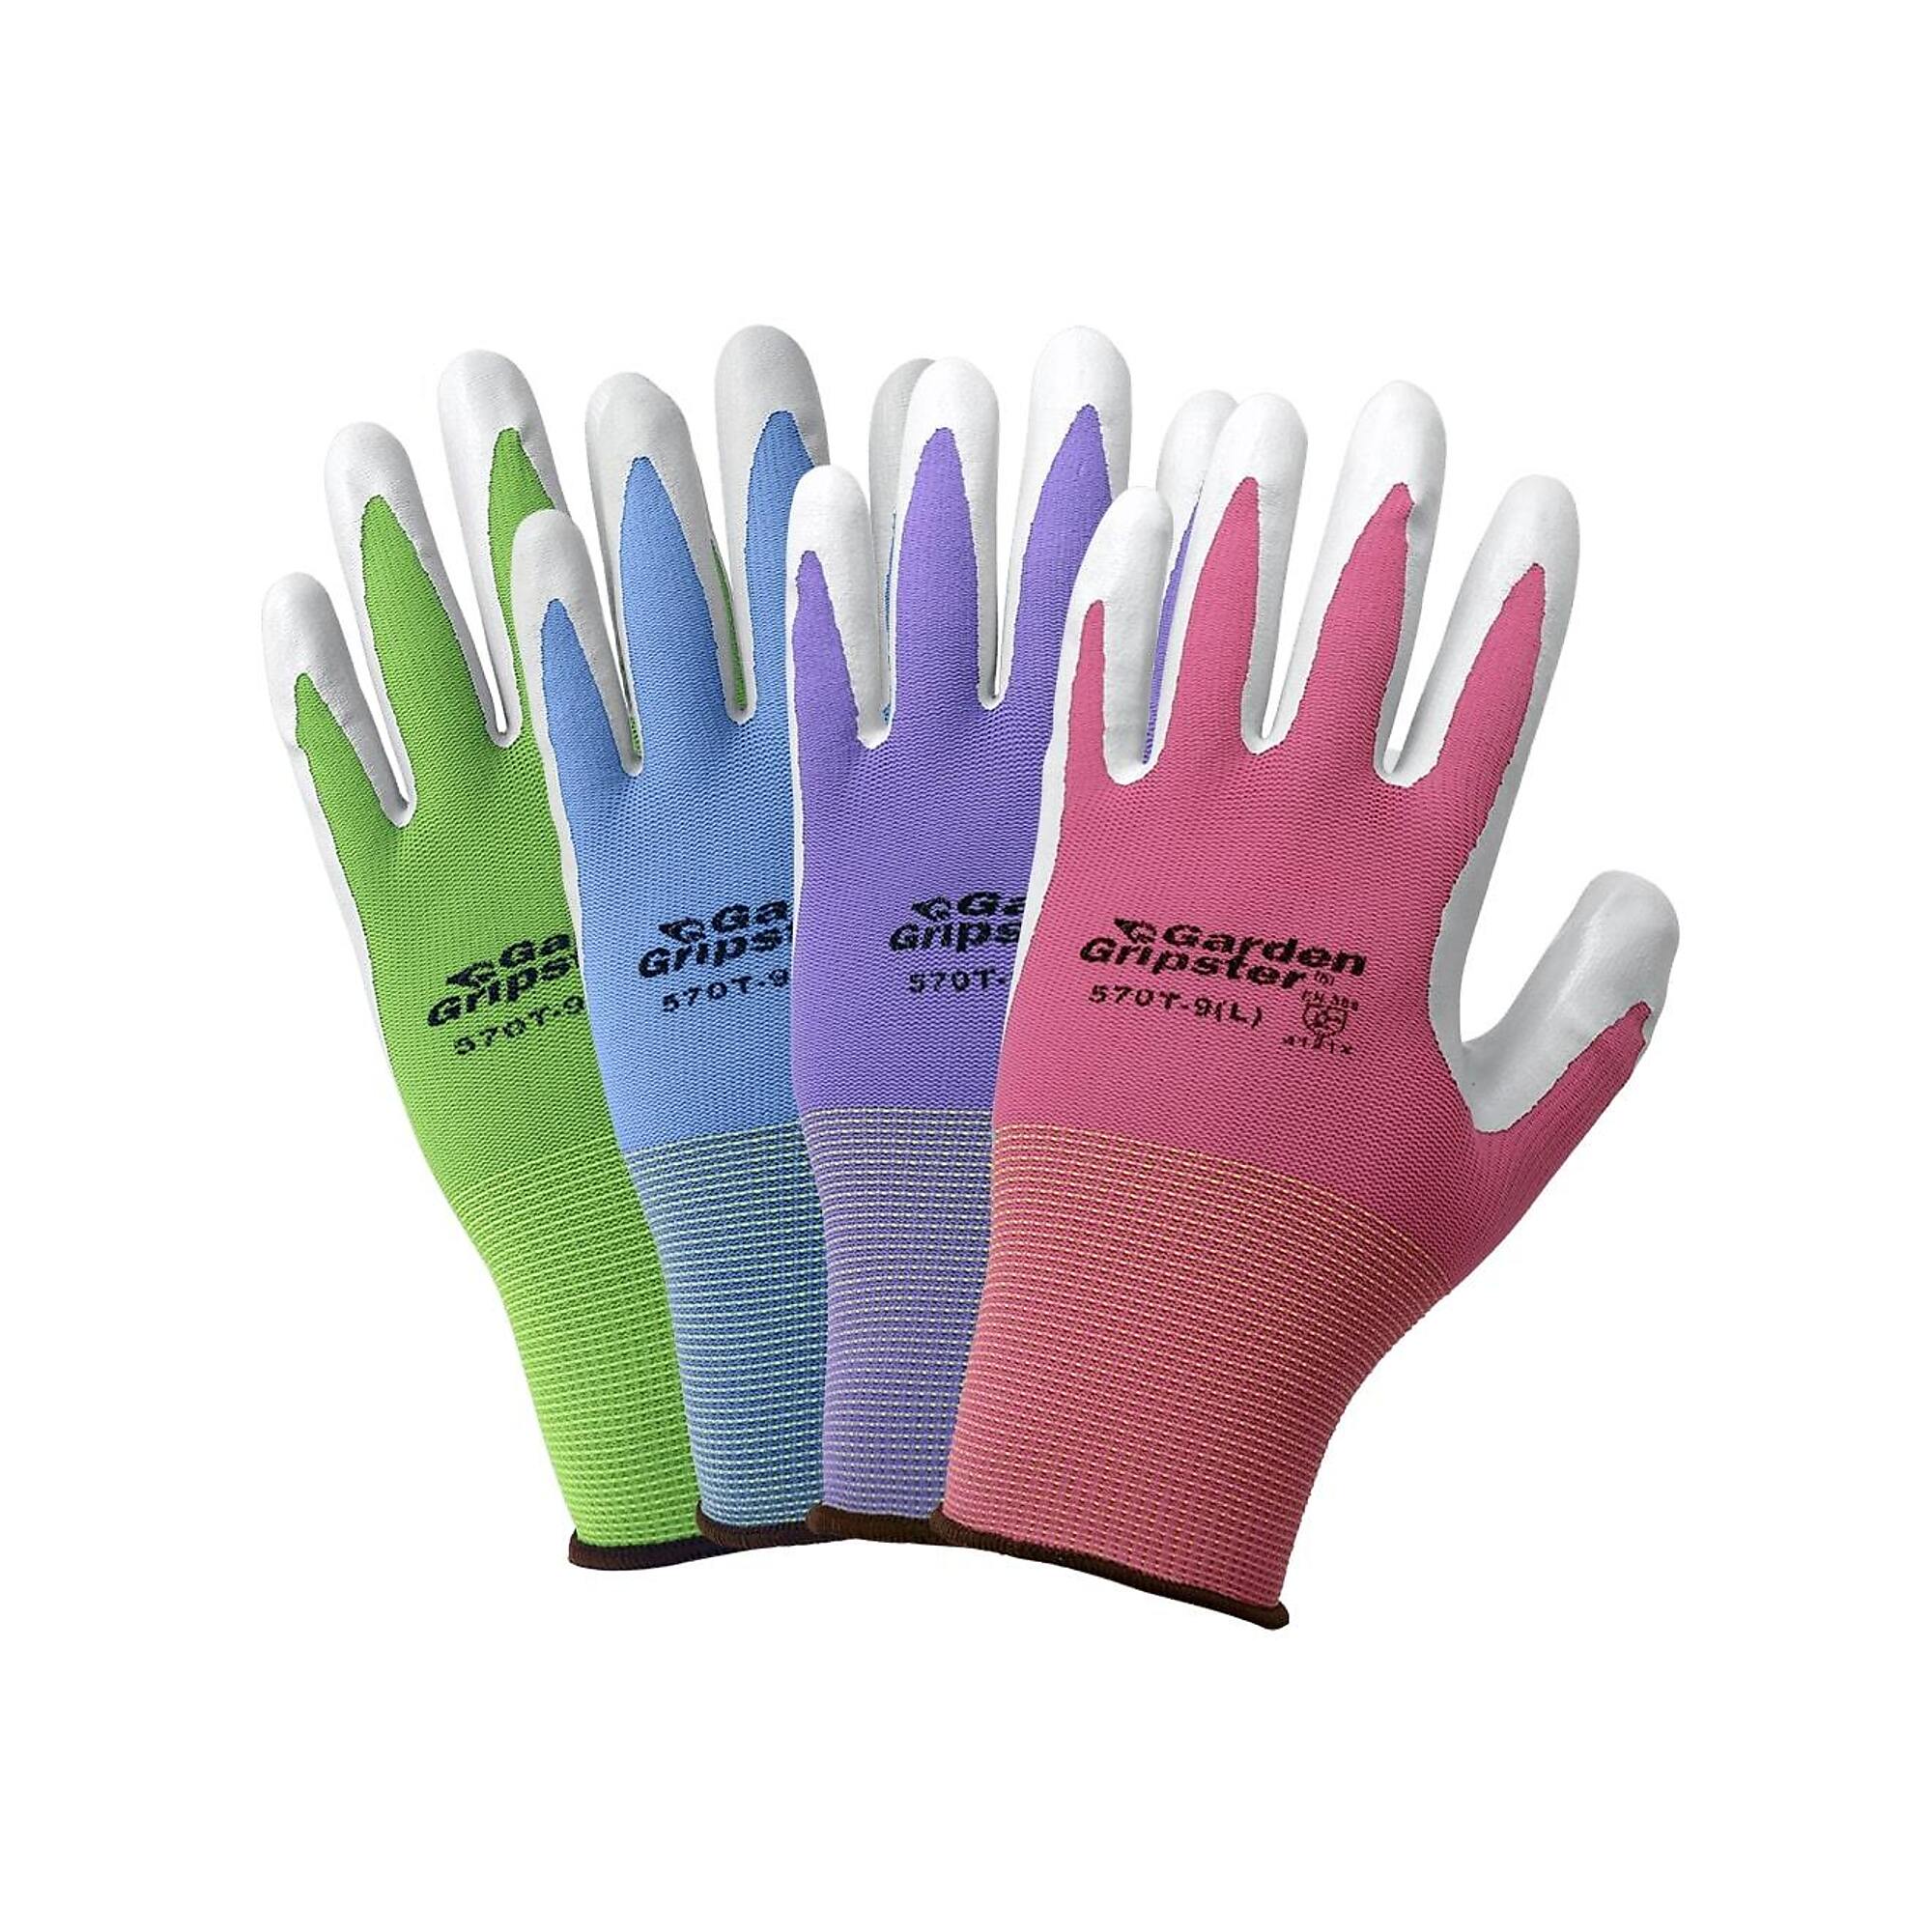 Global Glove Garden Gripster , Multi-Color, Nitrile Coated, Cut A1 Garden Gloves- 12 Pairs, Size S, Color Blue, Pink, Green, and Purple, Included (qty